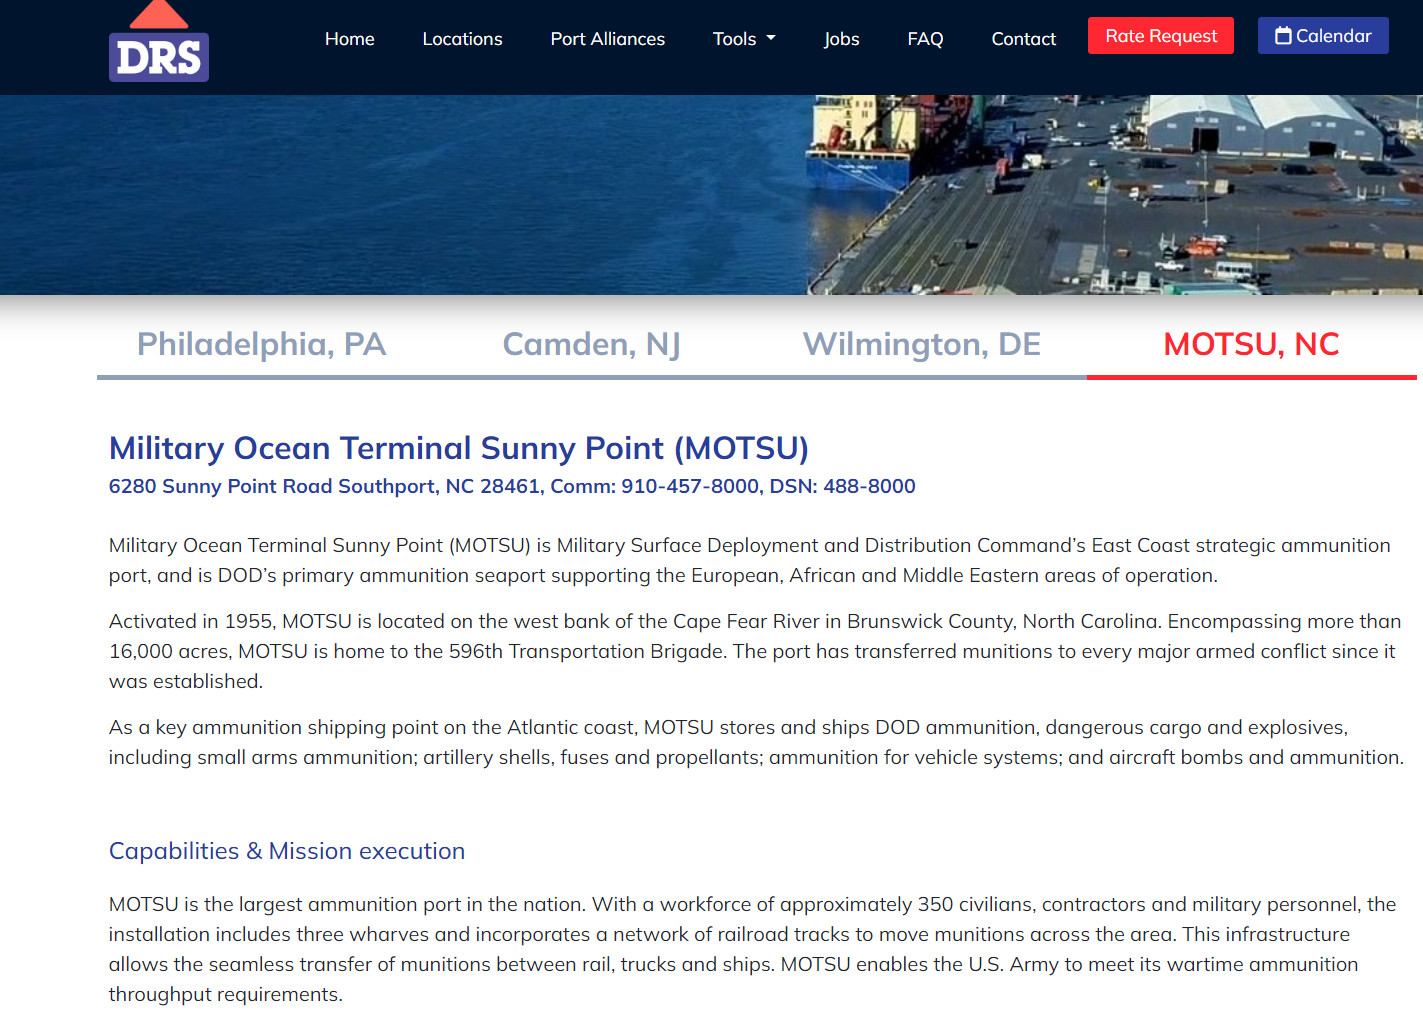 DRS has added Military Ocean Terminal Sunny Point (MOTSU) as its latest service location.